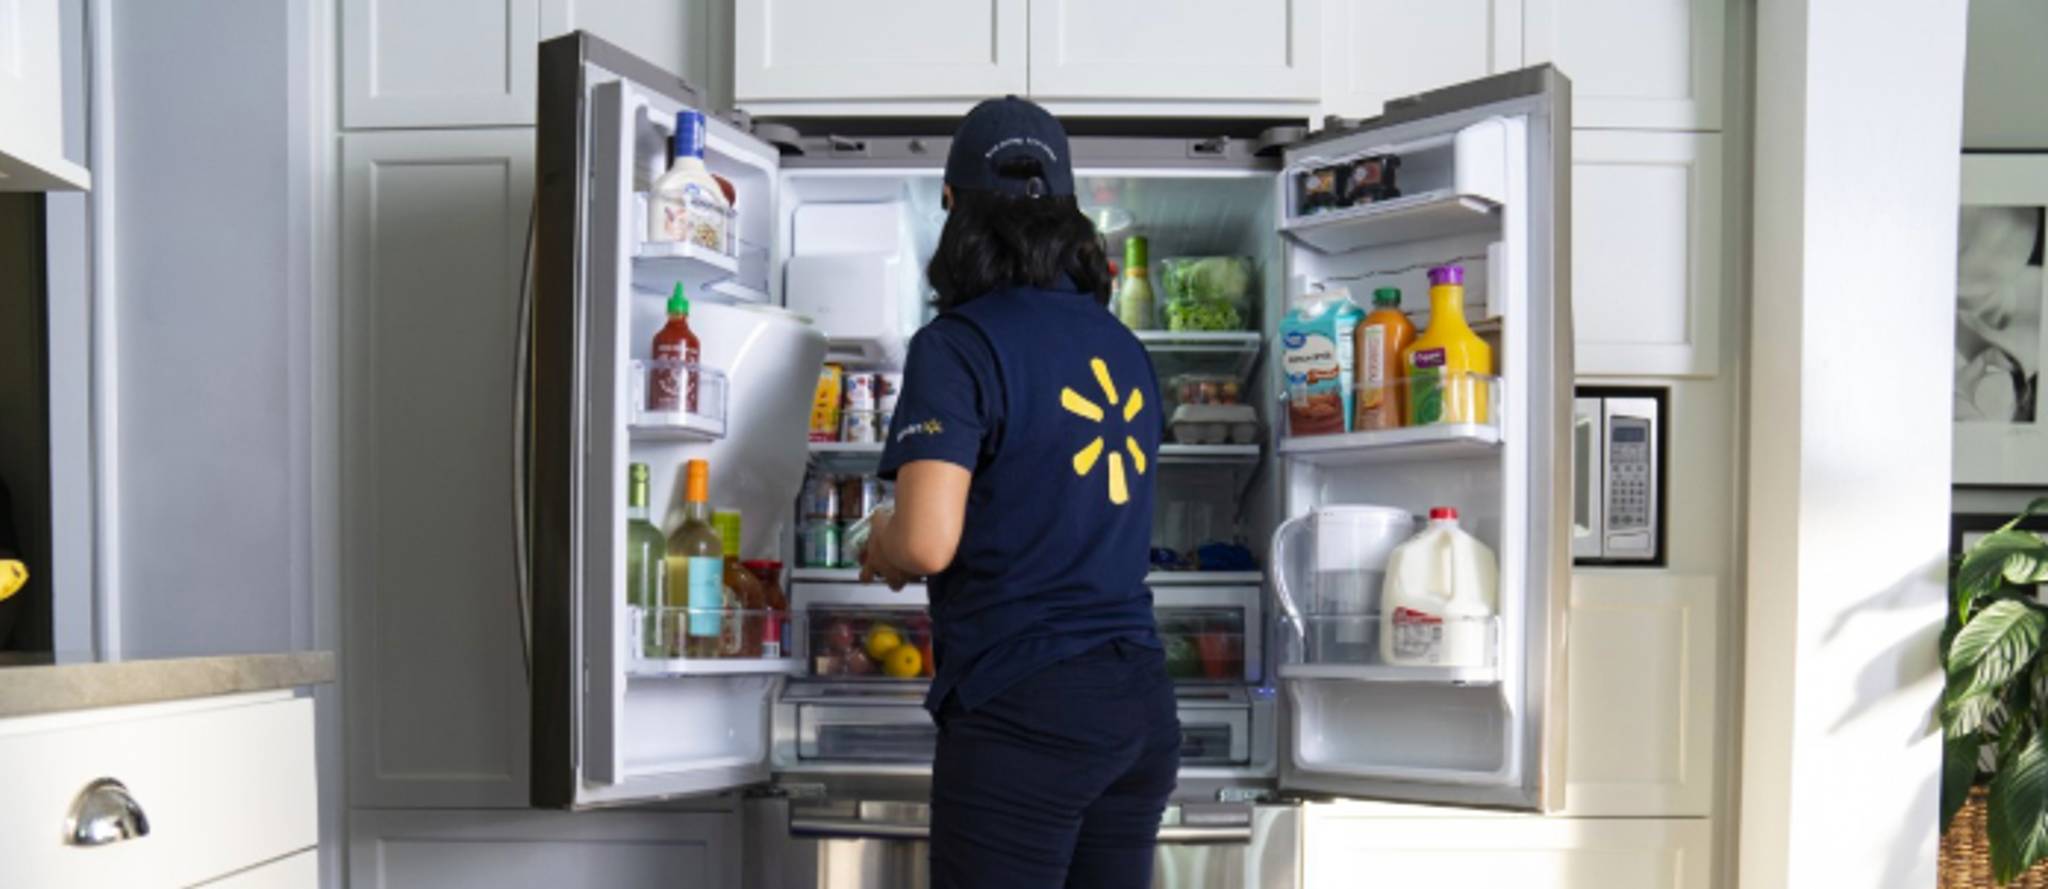 Walmart at home delivery offers peak convenience